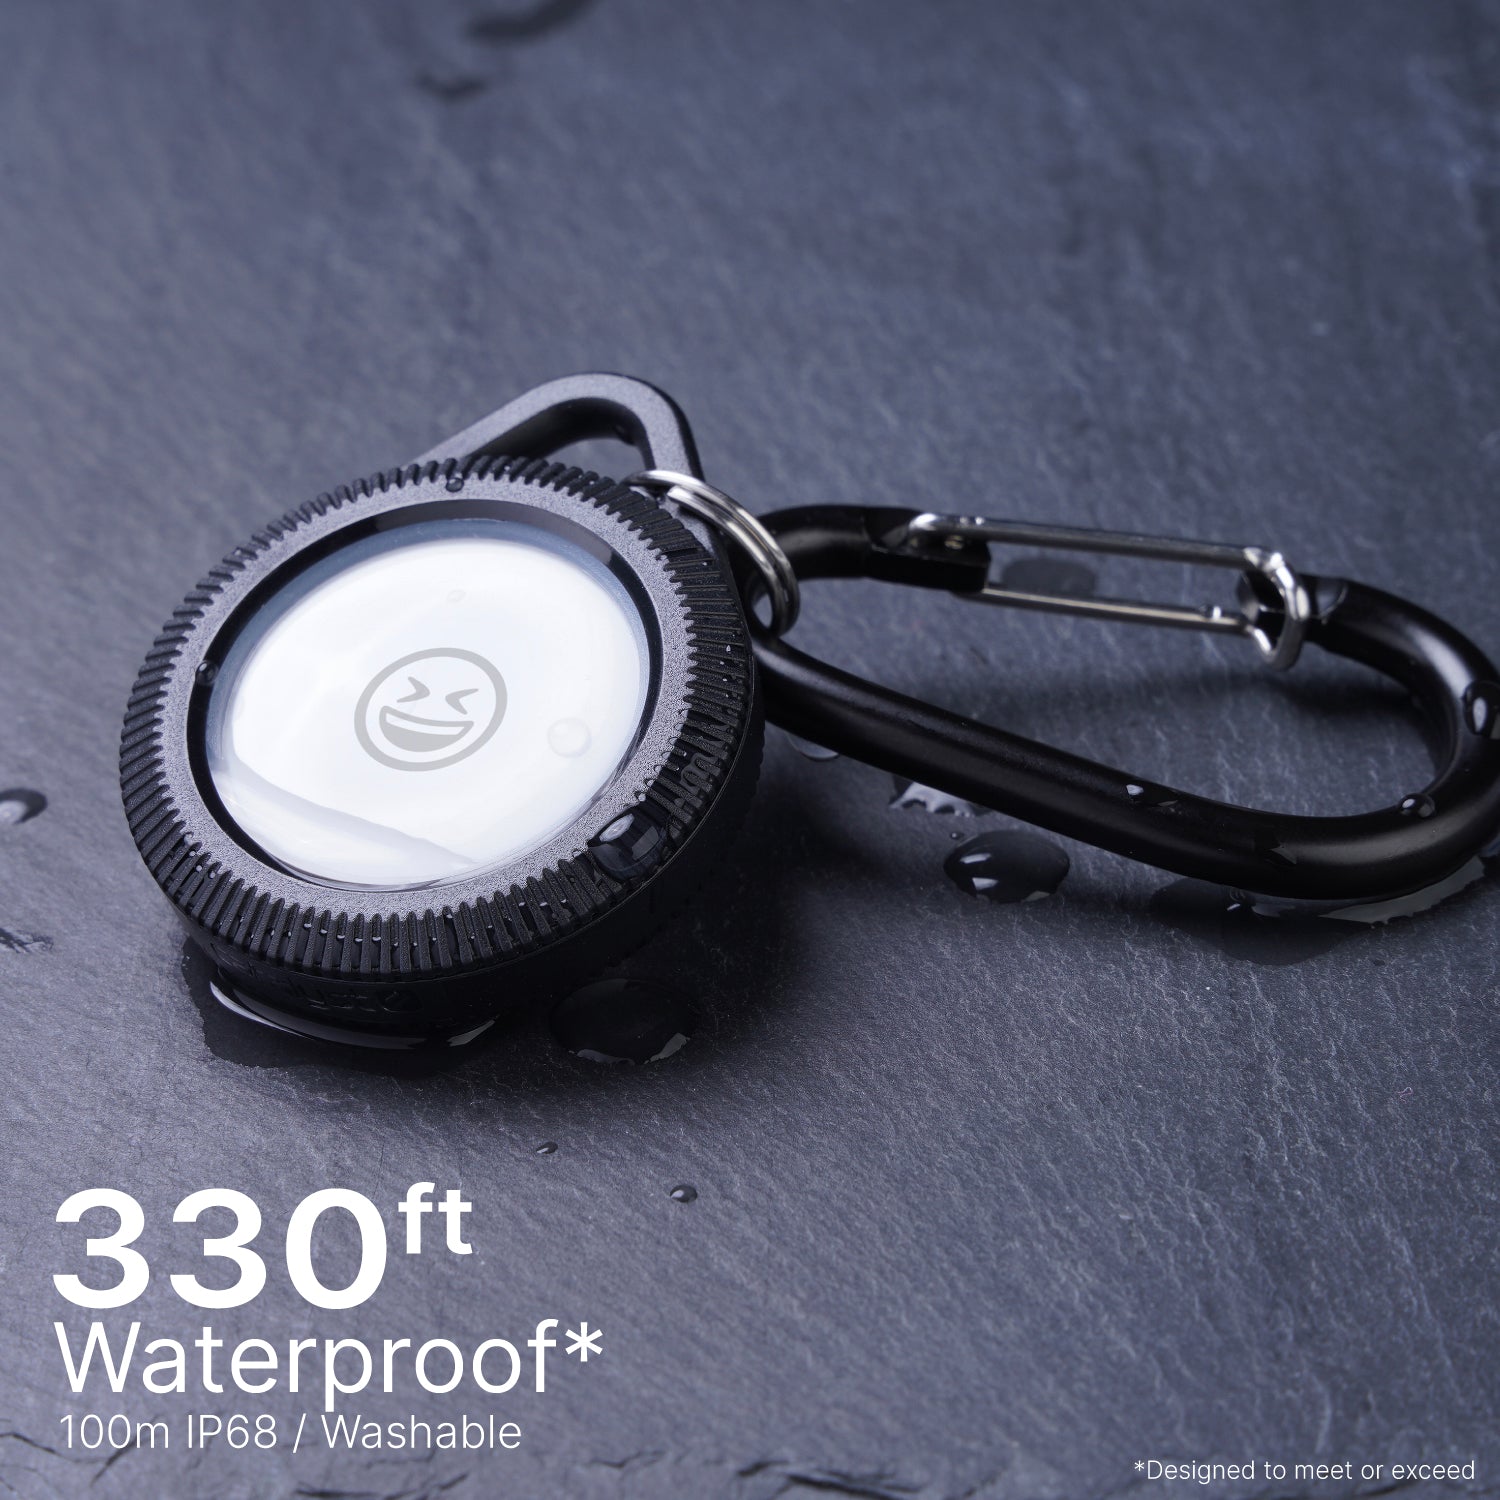 Catalyst airtag total protection case hang it with carabiner on the floor being waterproof text read 330ft. waterproof 100m IP68/ Washable